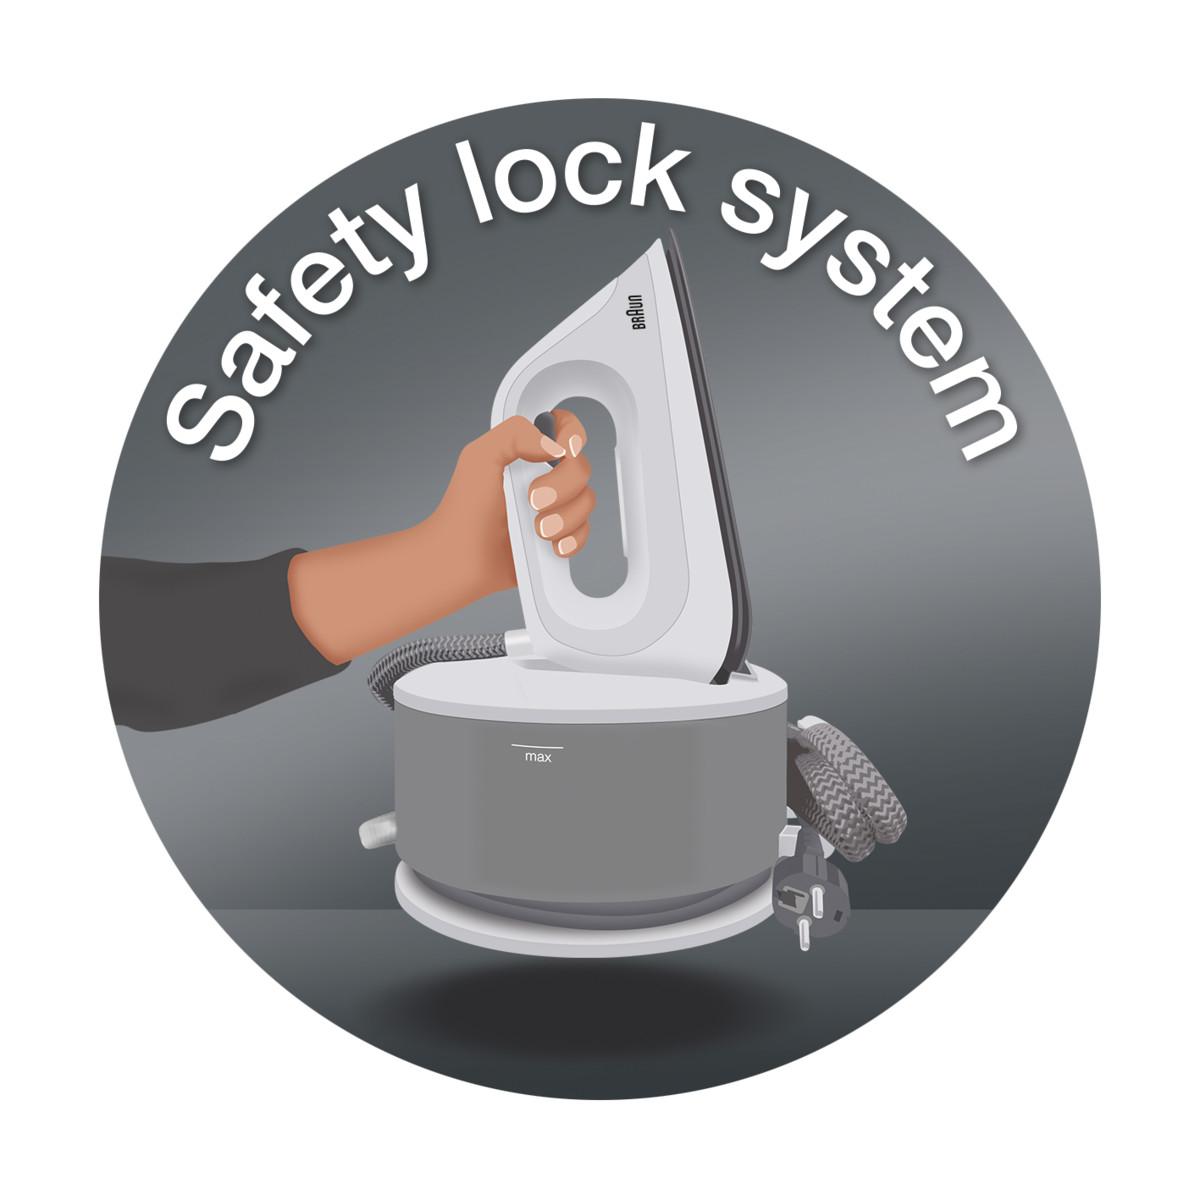 ../../../../../Downloads/ICON_CareStyle_Compact_Safety_lock_system.jpg